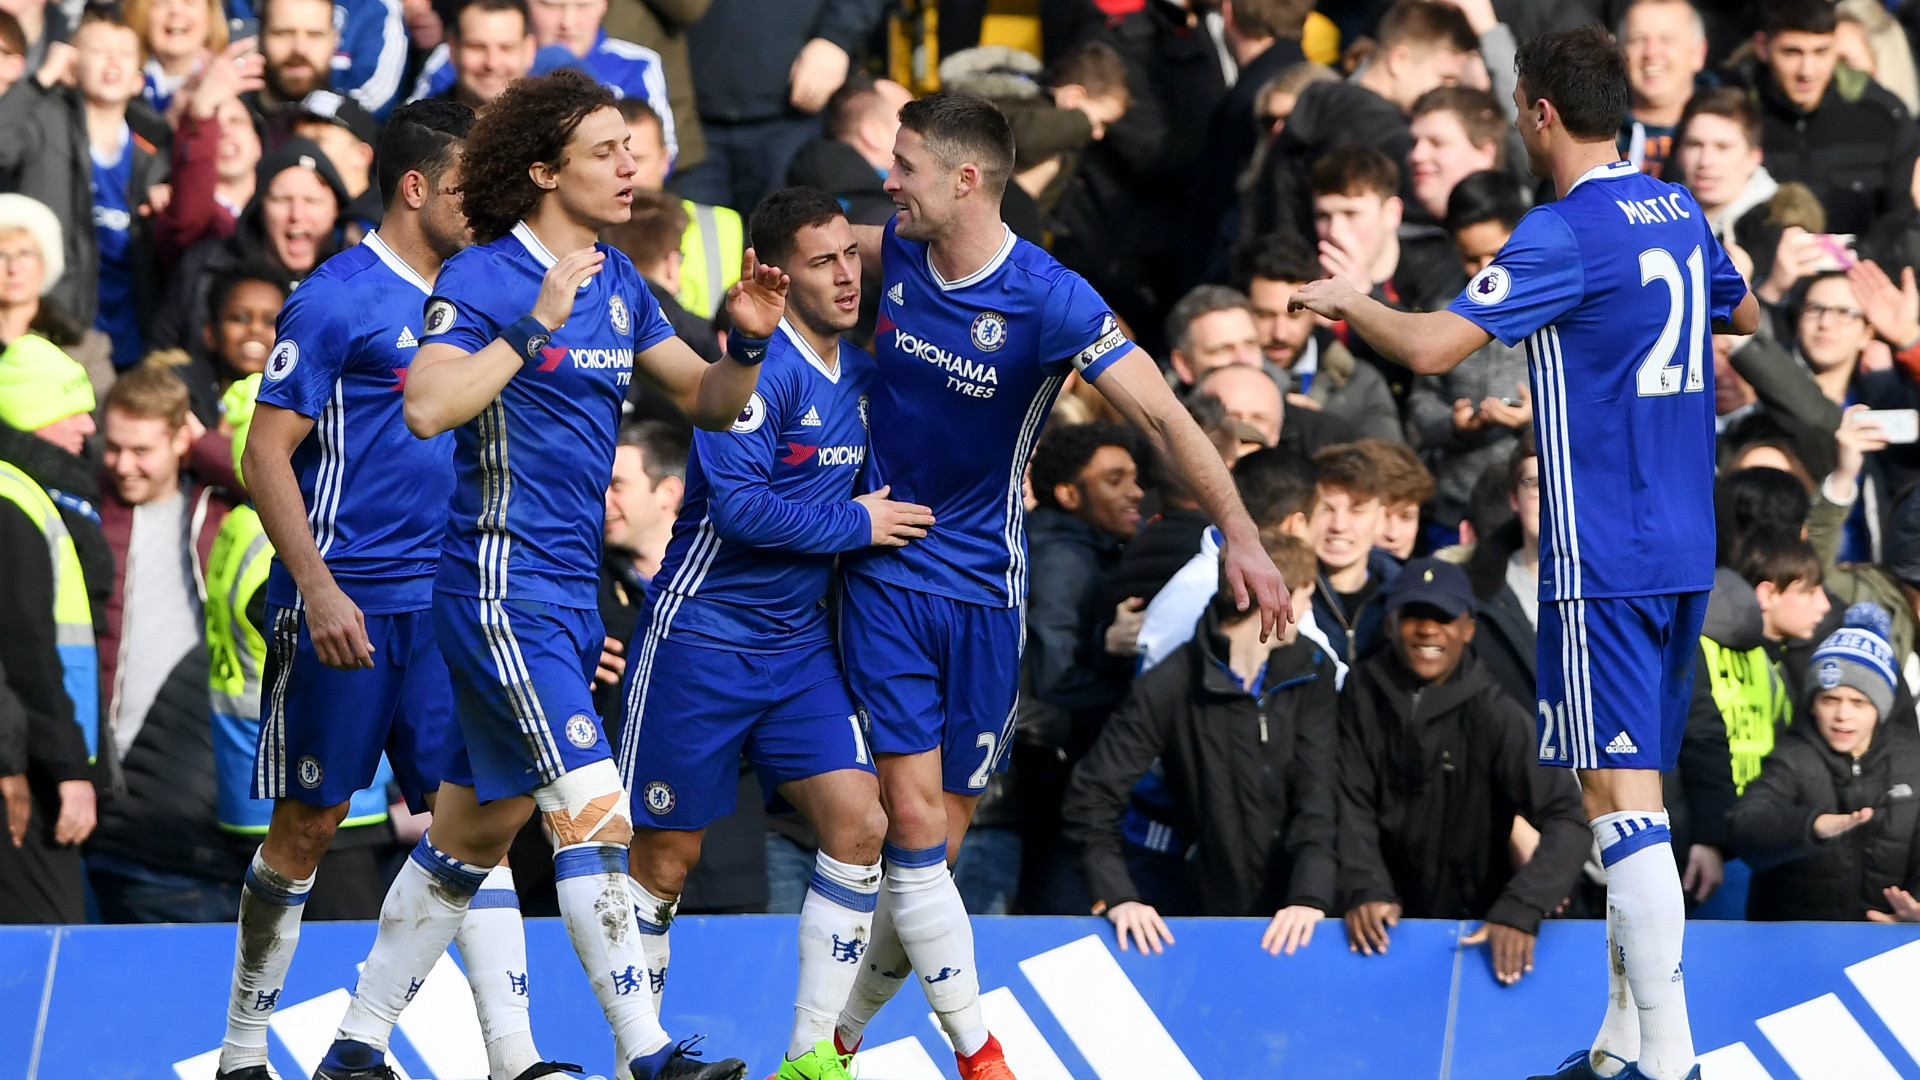 Bigger, stronger, just plain better - Chelsea are champions in